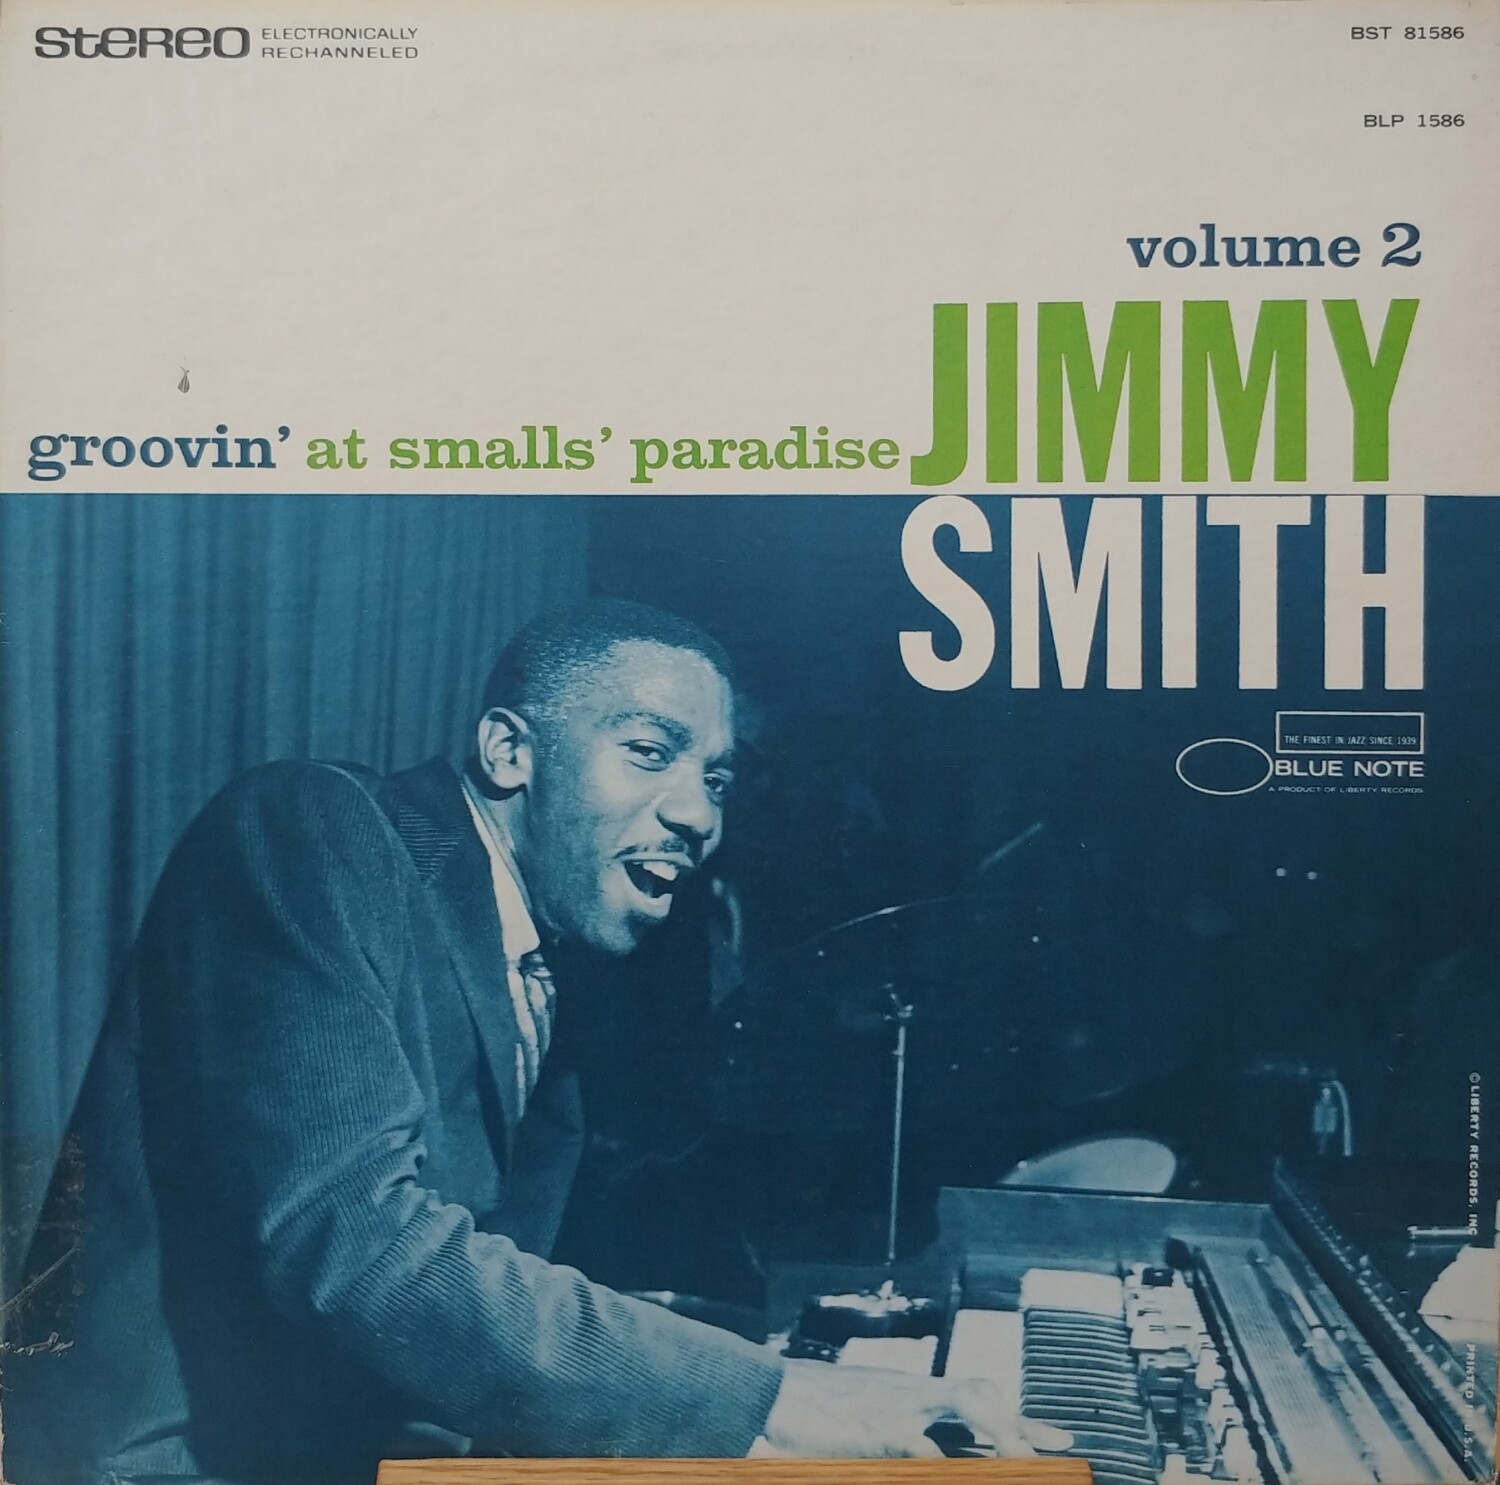 Jimmy Smith - Groovin' at Smalls' paradise Vol.2